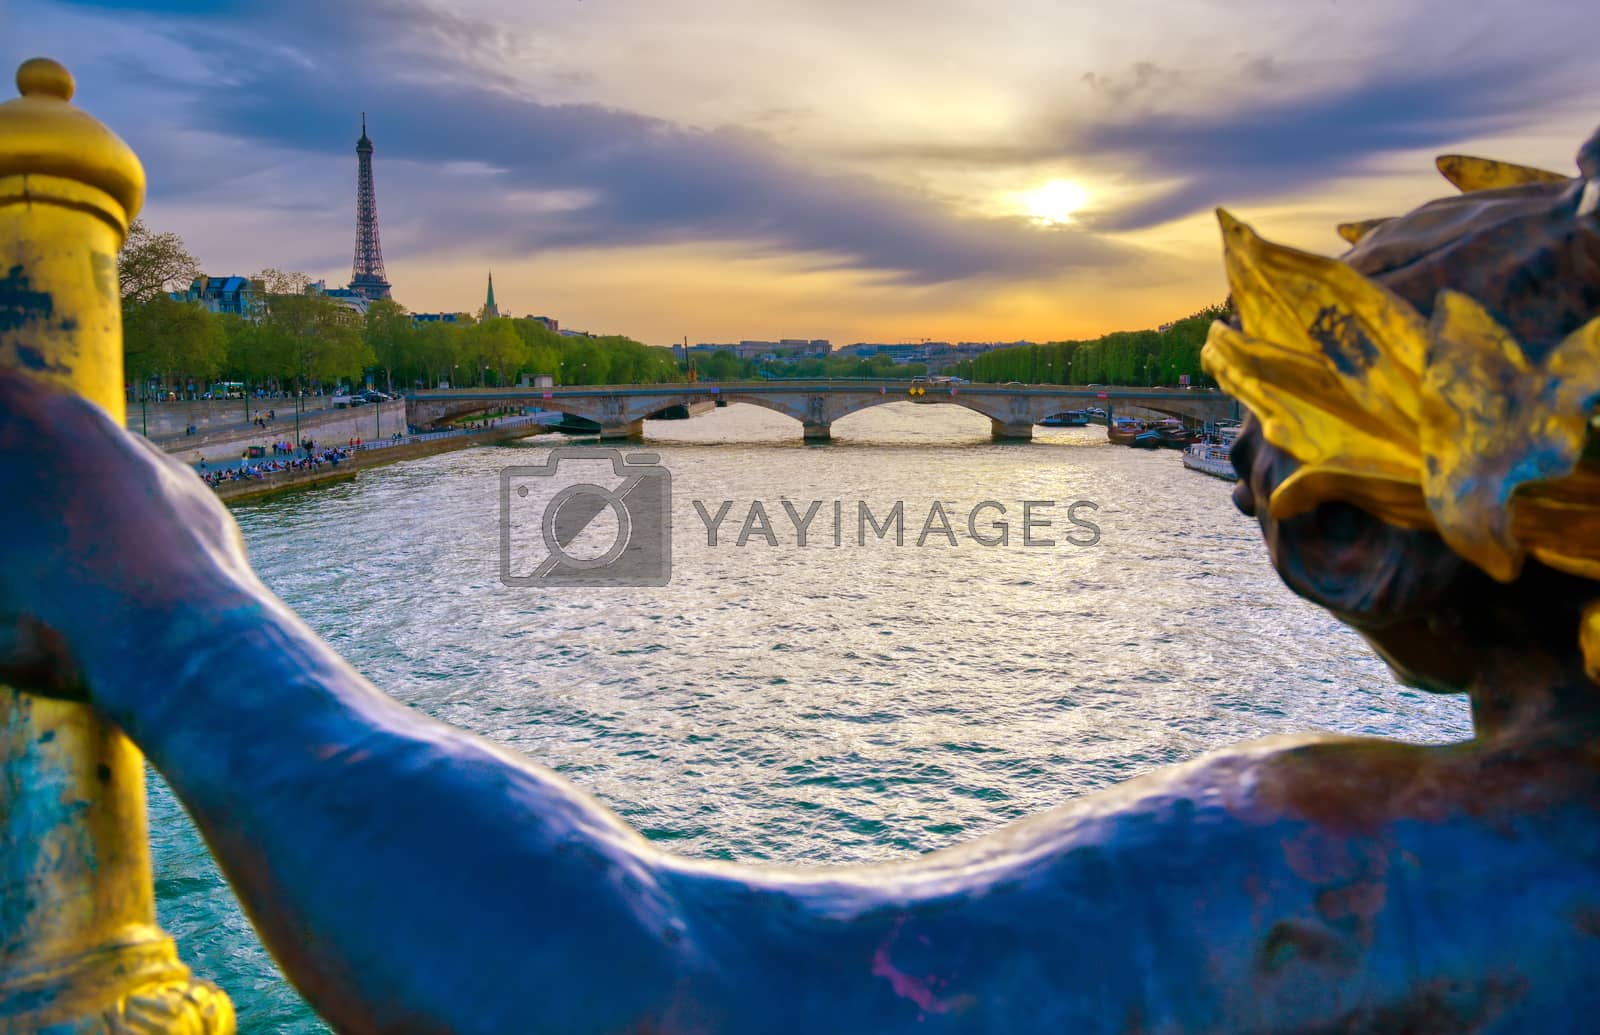 Royalty free image of Paris, France from the Pont Alexandre III  by jbyard22